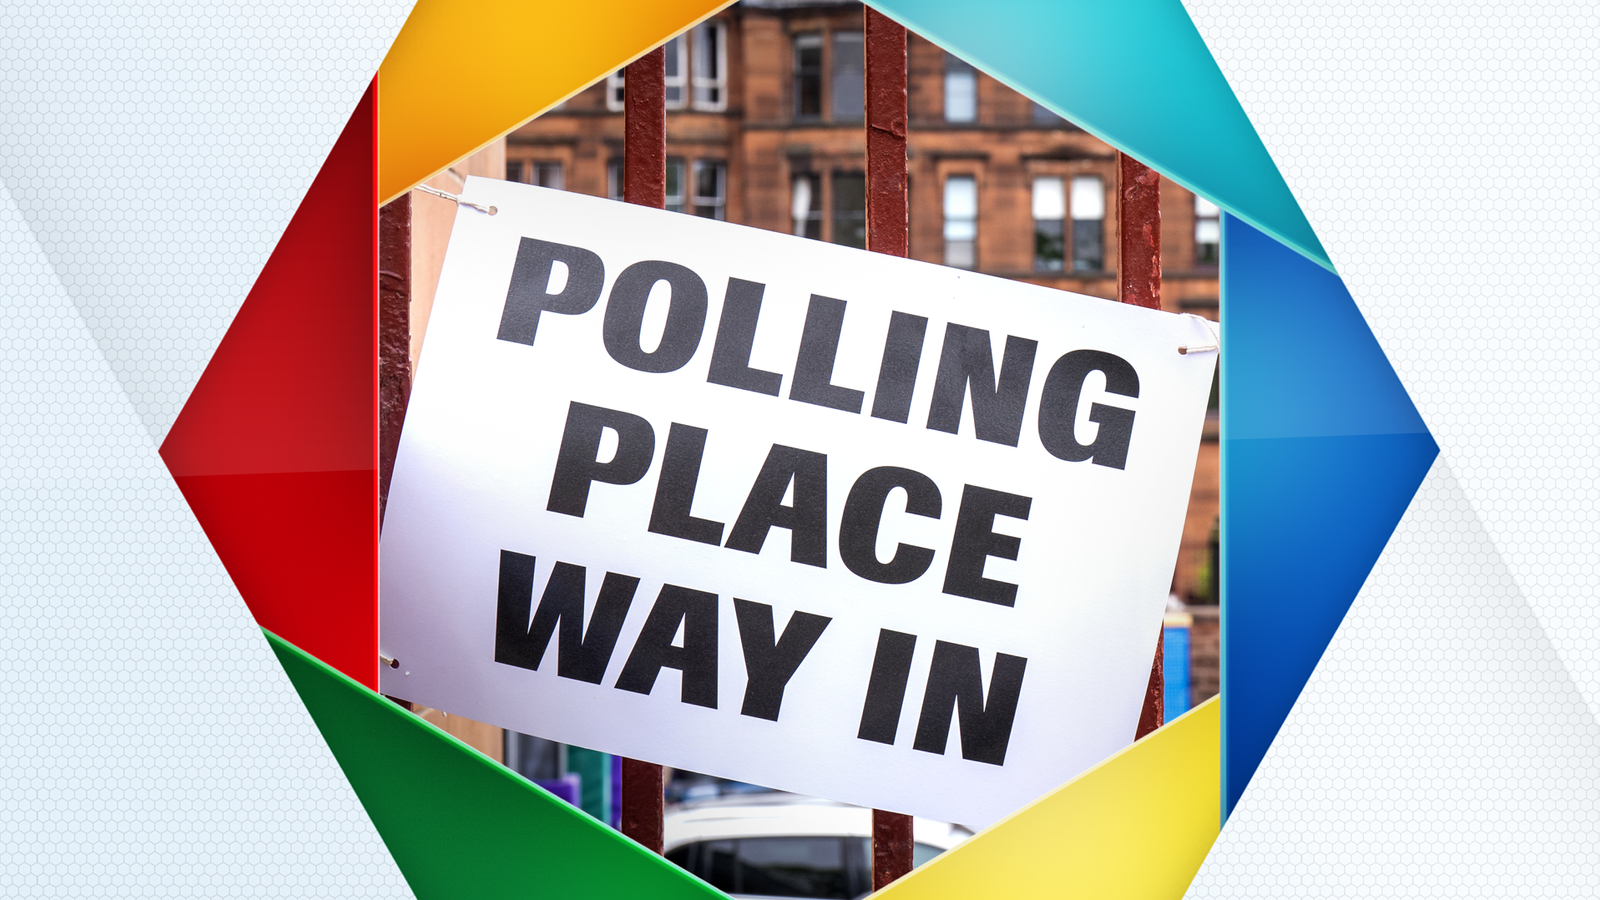 Check which party could win in your constituency after last YouGov projection before polling day